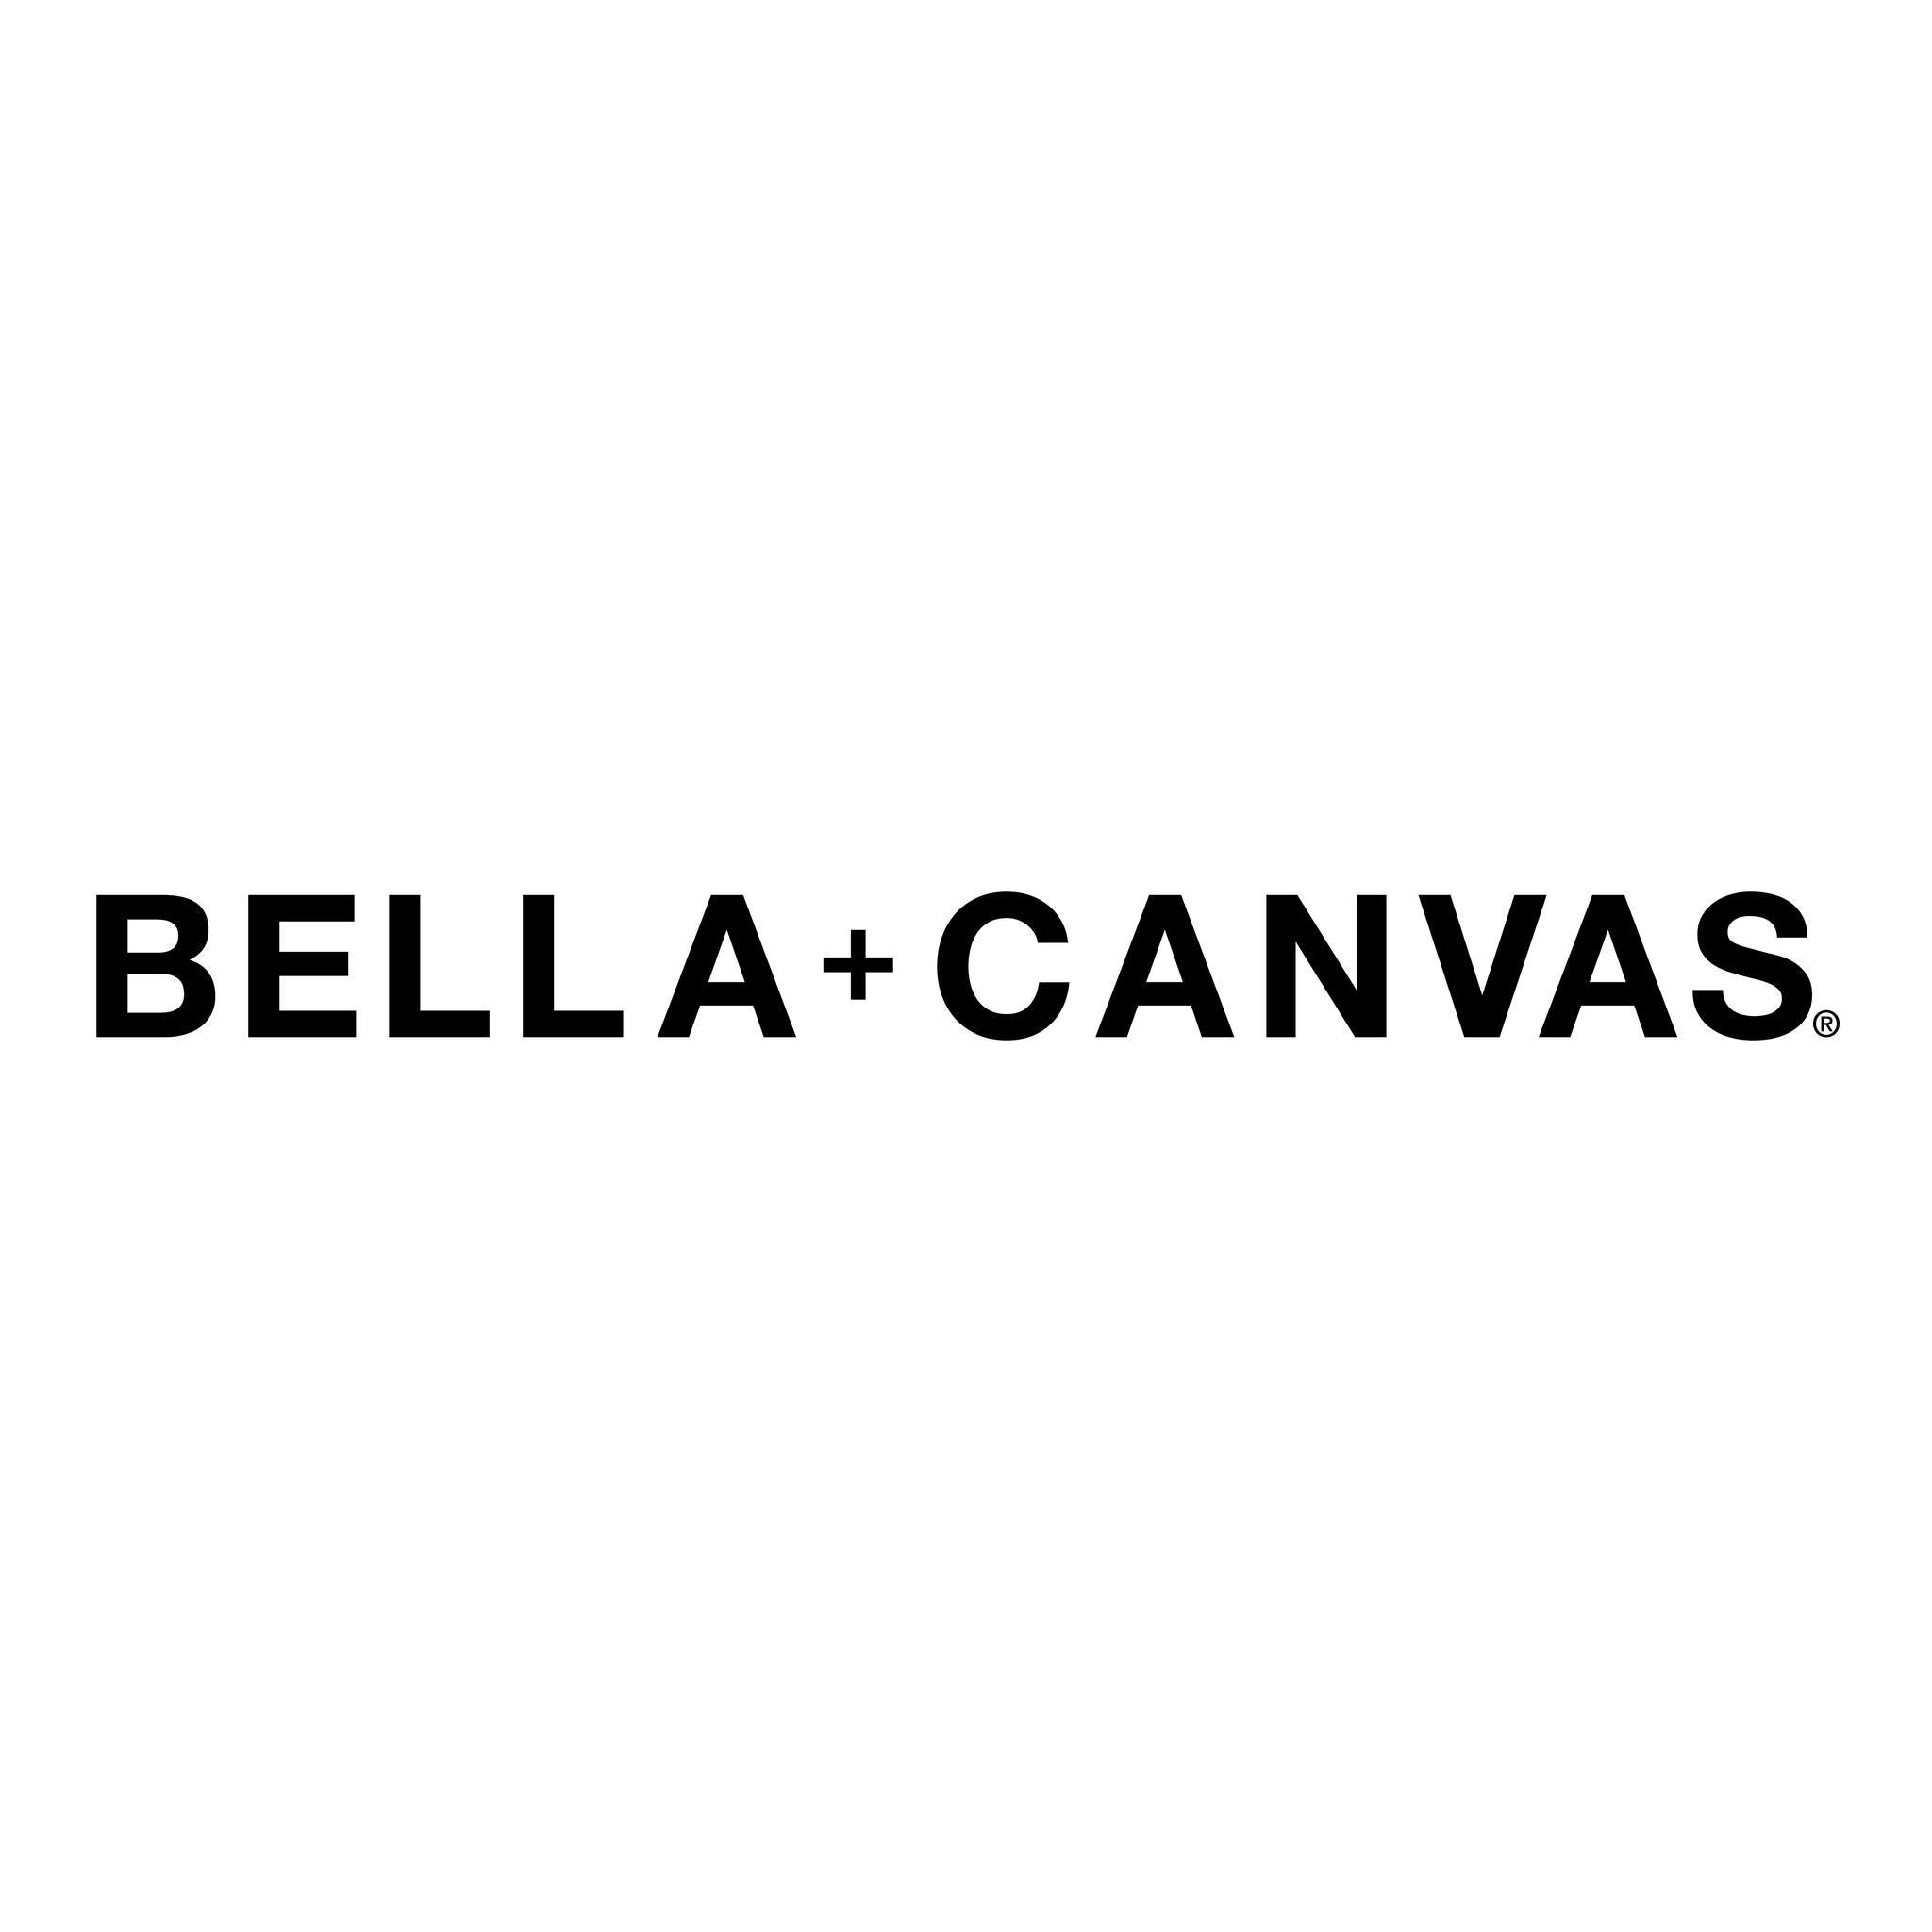 Governor Ivey Announces BELLA+CANVAS Plans High-Tech Fabric-Cutting Facility in Alabama, Creating 557 Jobs in Wetumpka